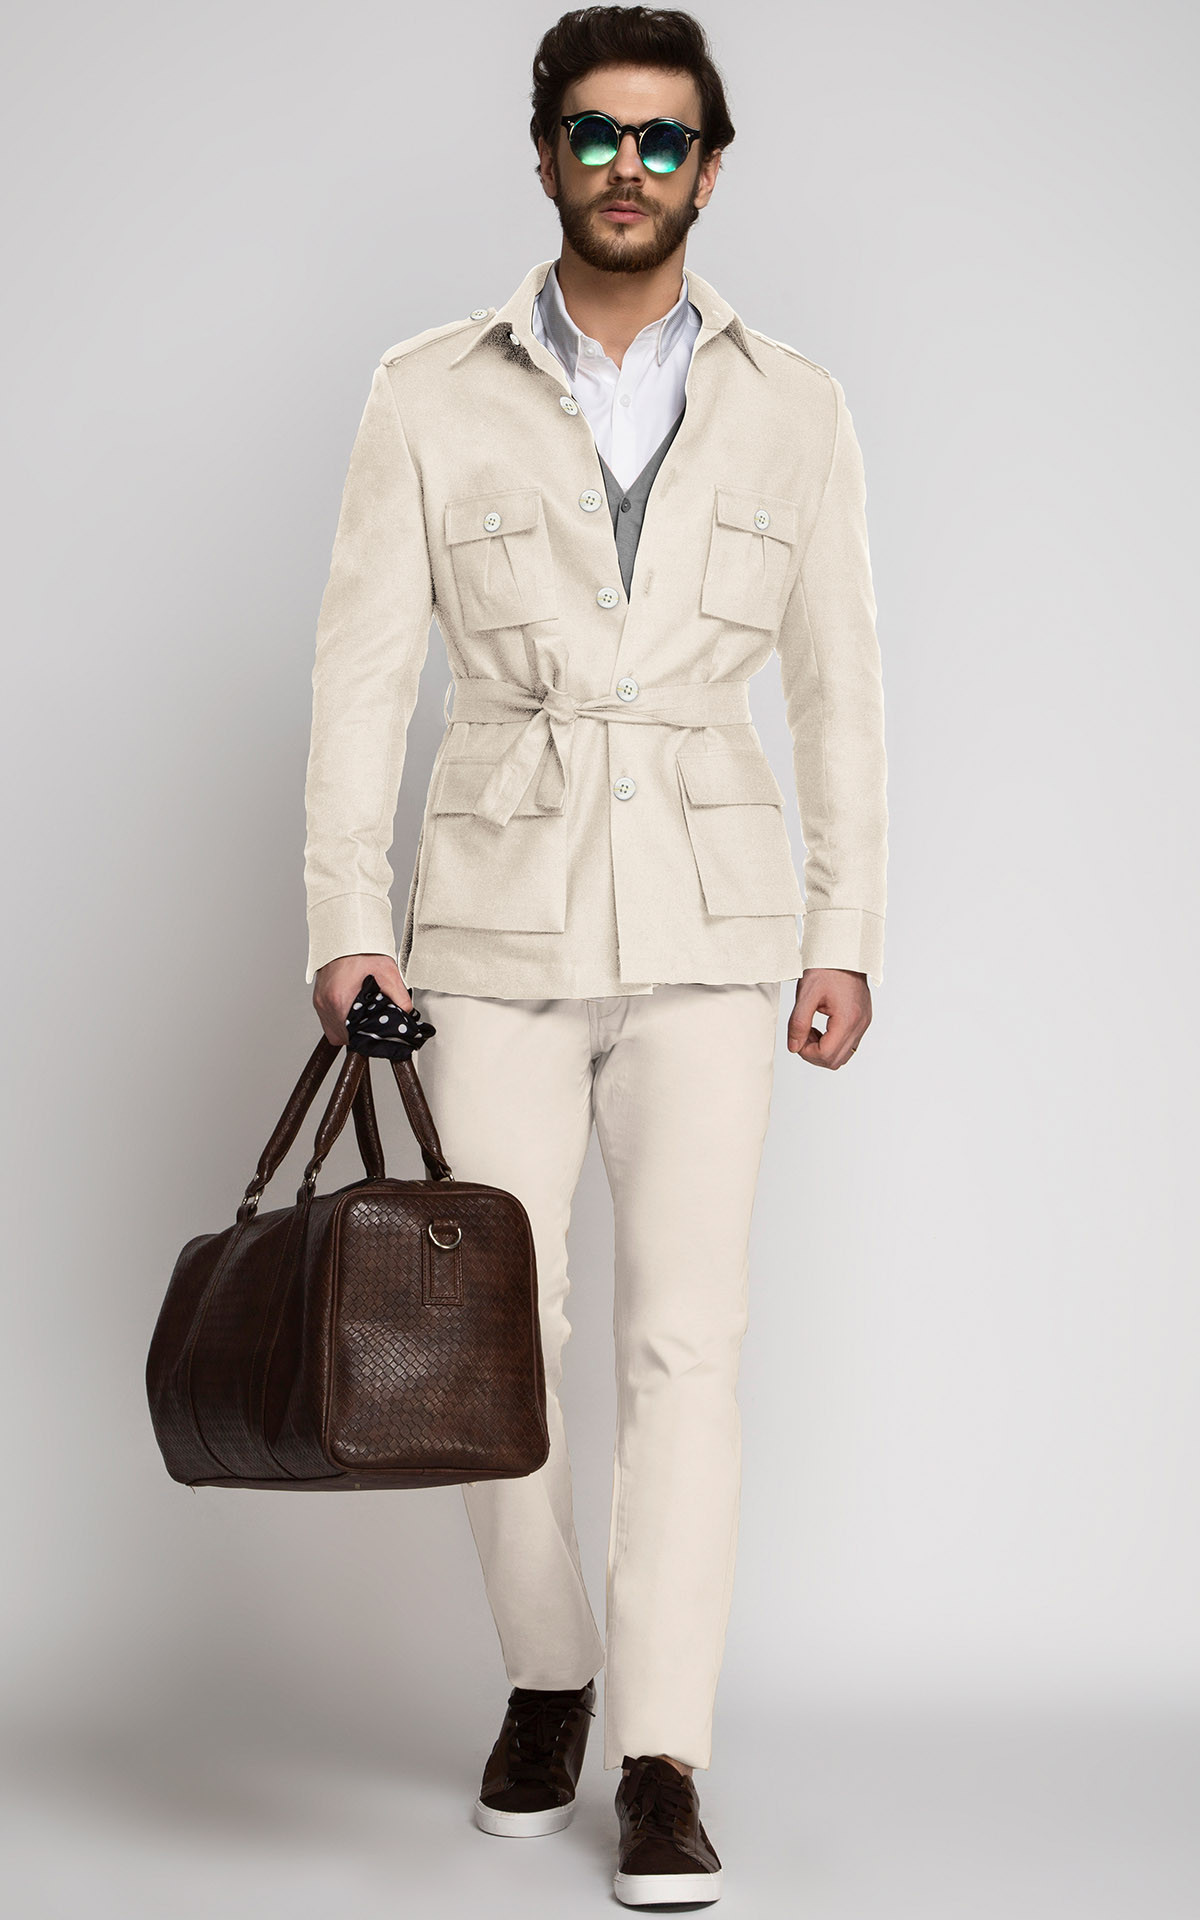 Colonial Beige Military Suit